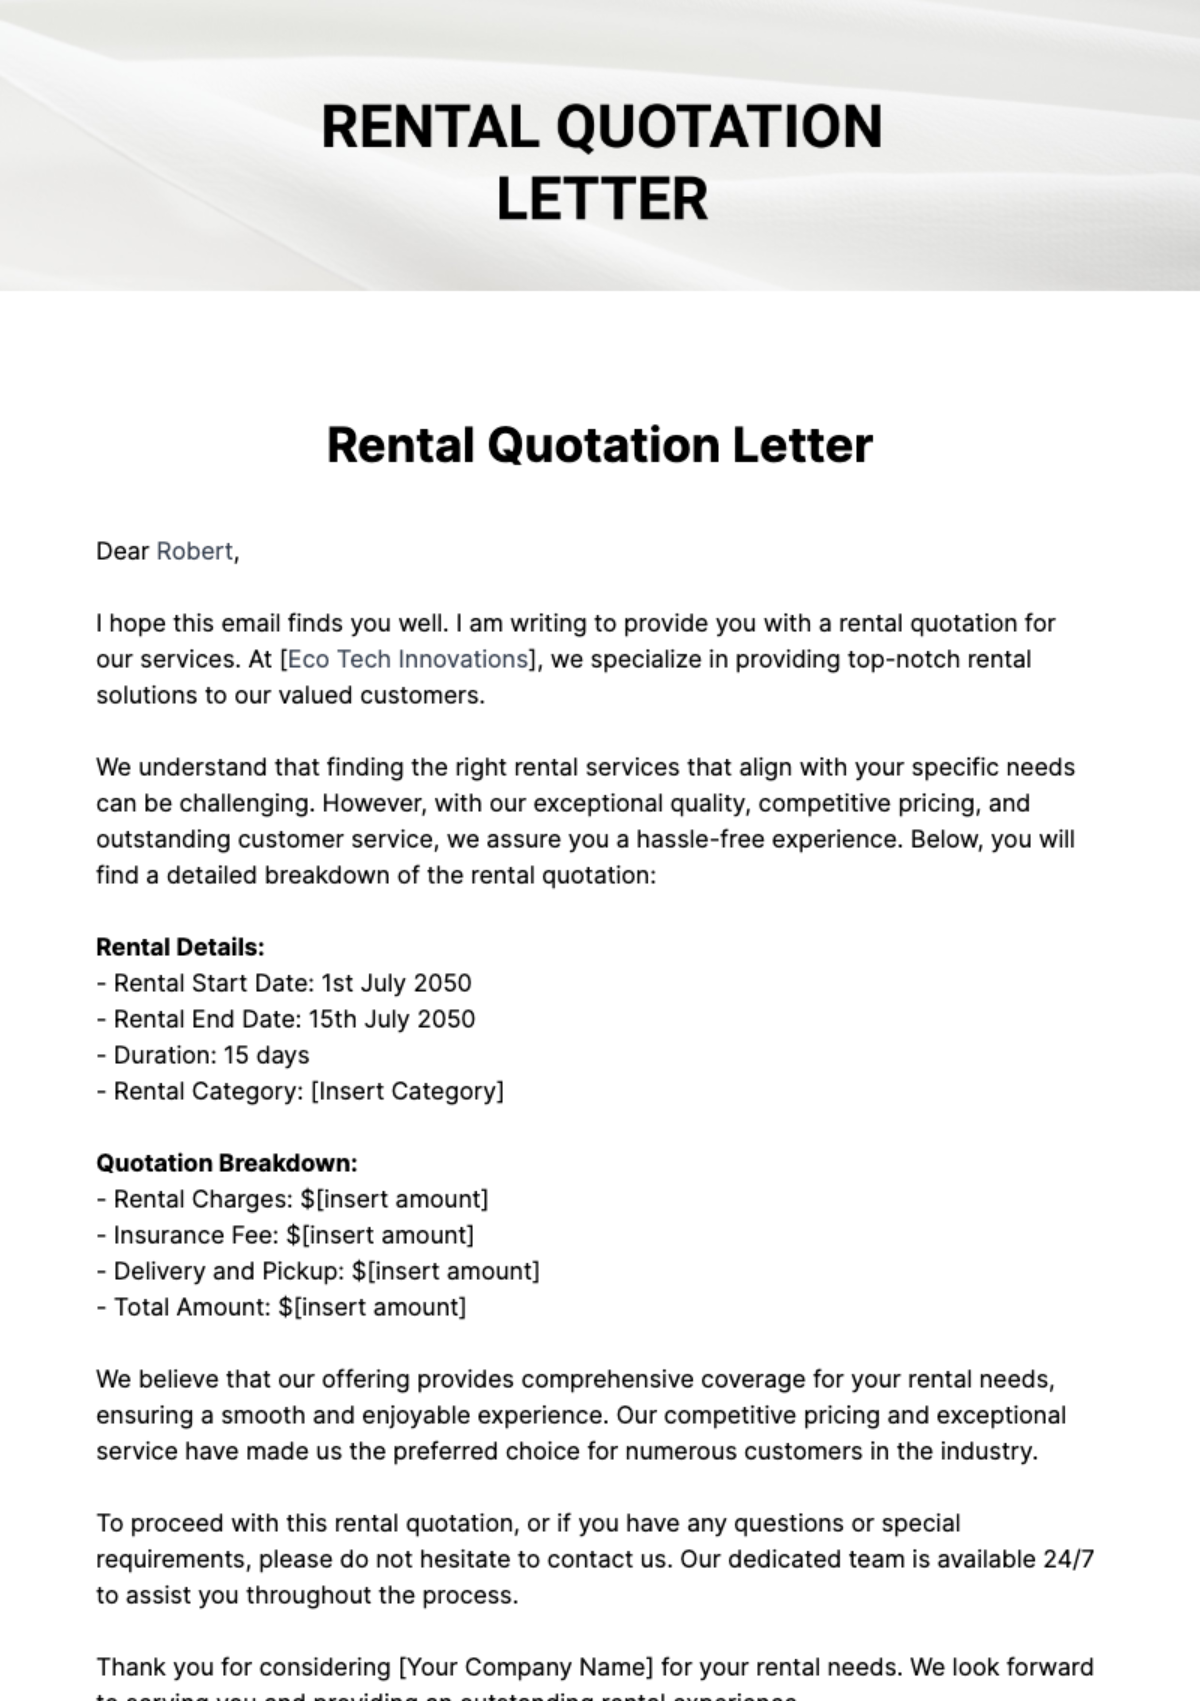 Free Rental Quotation Letter Template